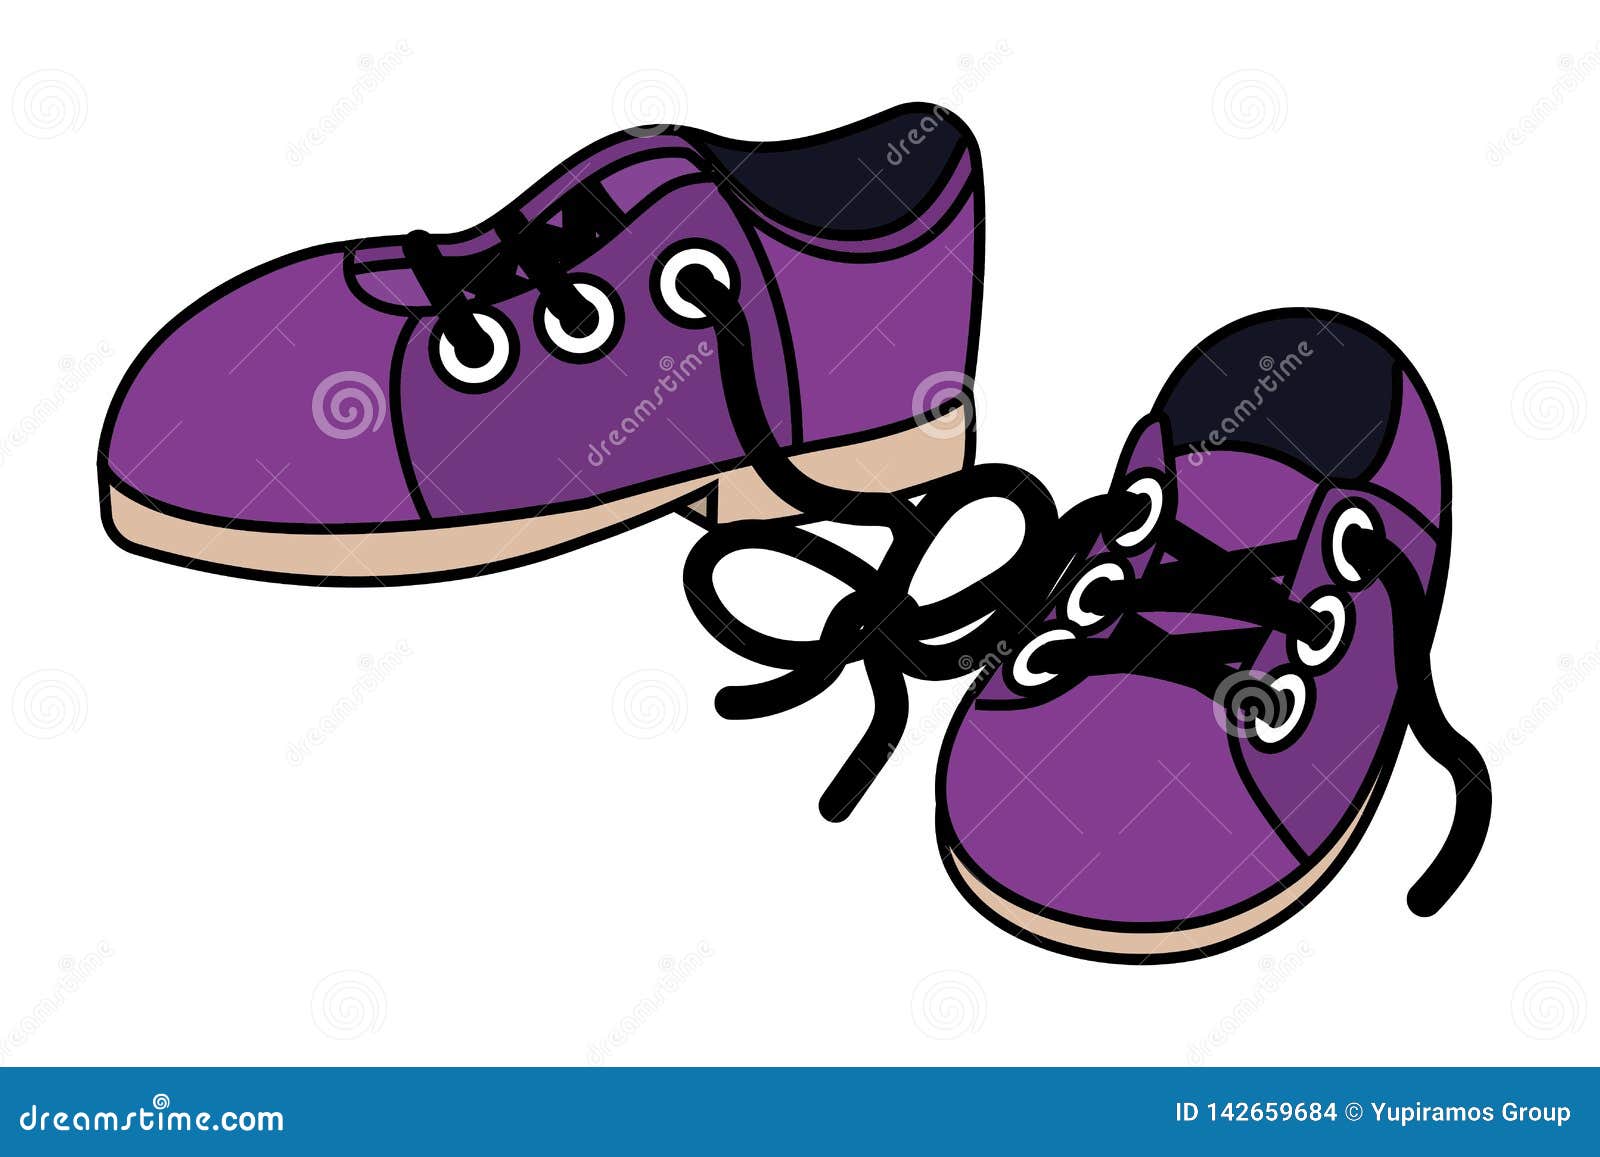 Shoes clothing cartoon stock vector. Illustration of shoe - 142659684